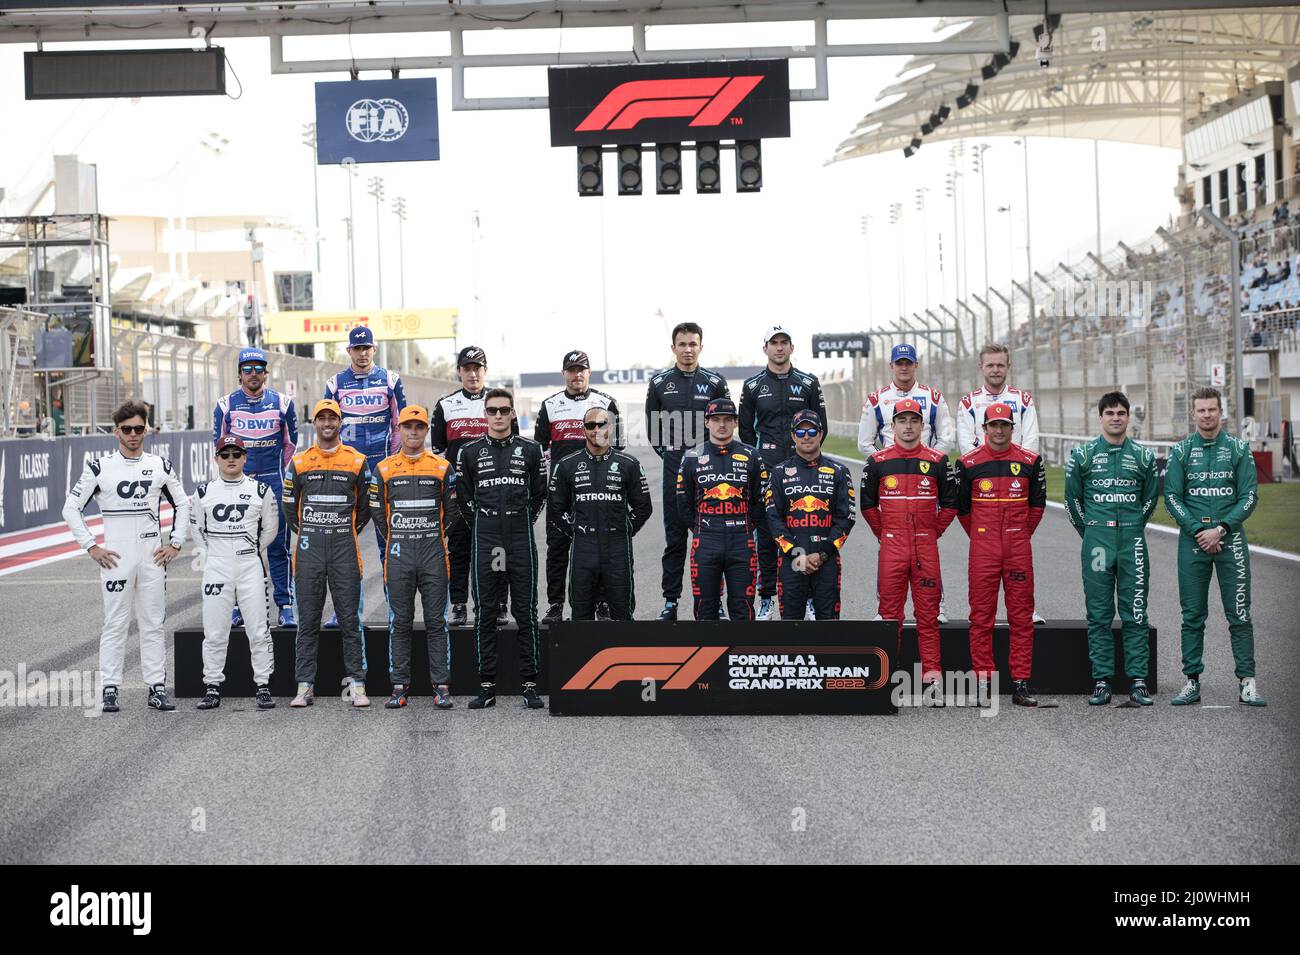 (220321) -- SAKHIR, March 21, 2022 (Xinhua) -- Drivers pose for official picture before the Bahrain Formula One Grand Prix at the Bahrain International Circuit in the city of Sakhir on March 20, 2022. (DPPI/Handout via Xinhua) Stock Photo